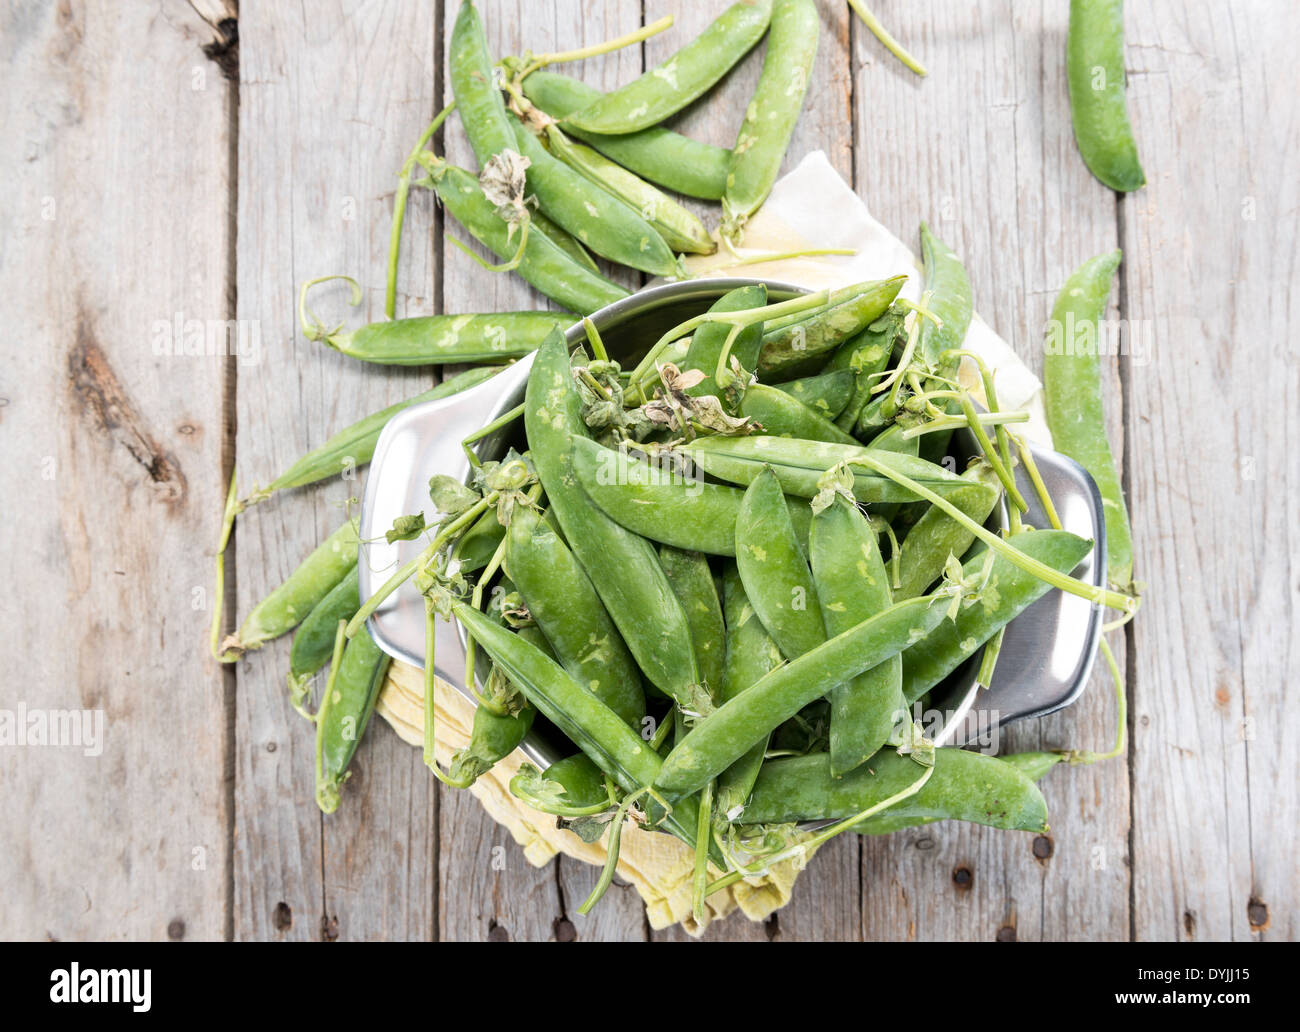 Portion of fresh pea pods in a bowl on wooden background Stock Photo